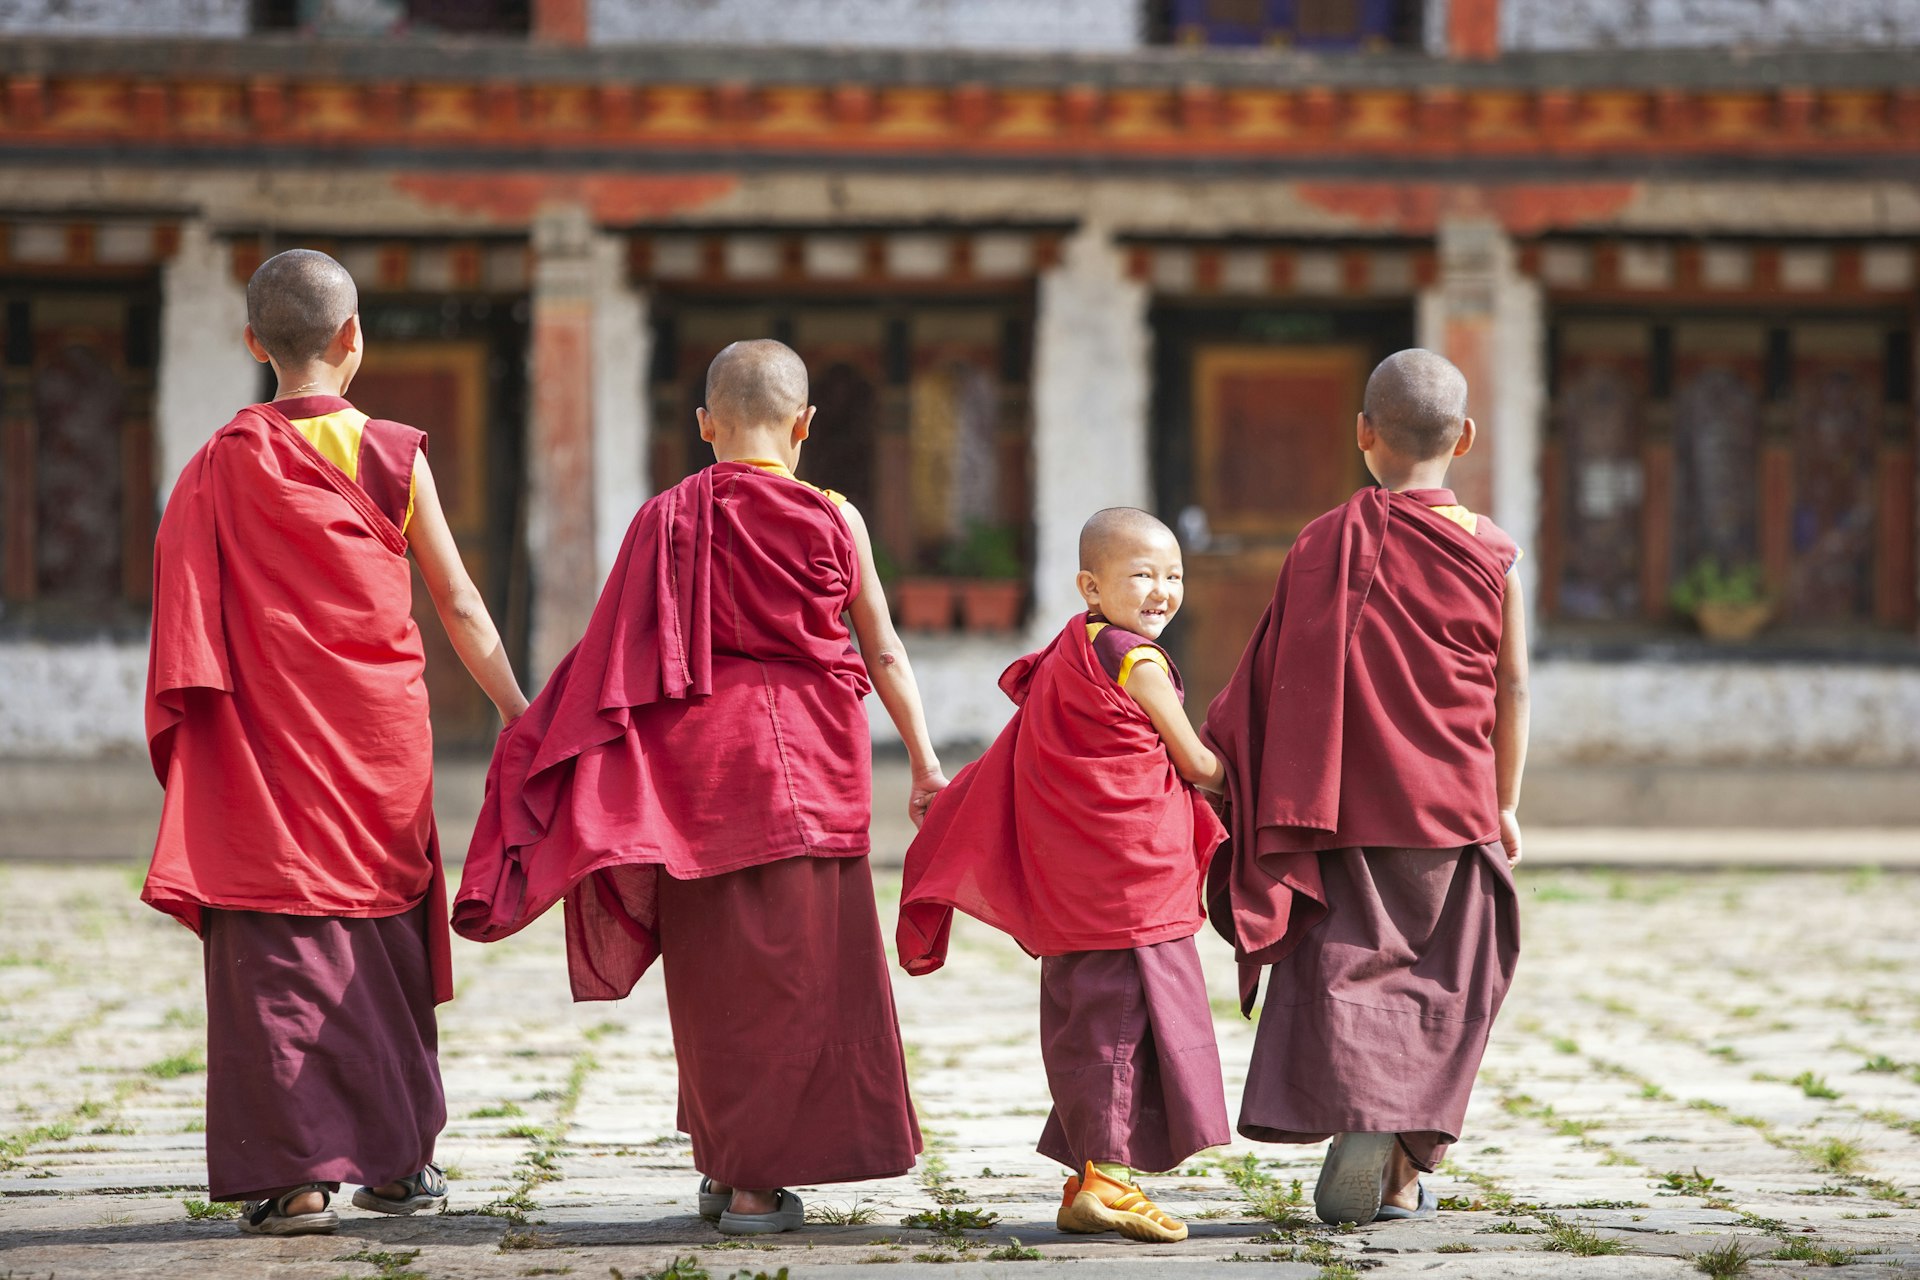 Four novice monks wearing red robes walk through a courtyard, with one giving a cheeky smile at the camera